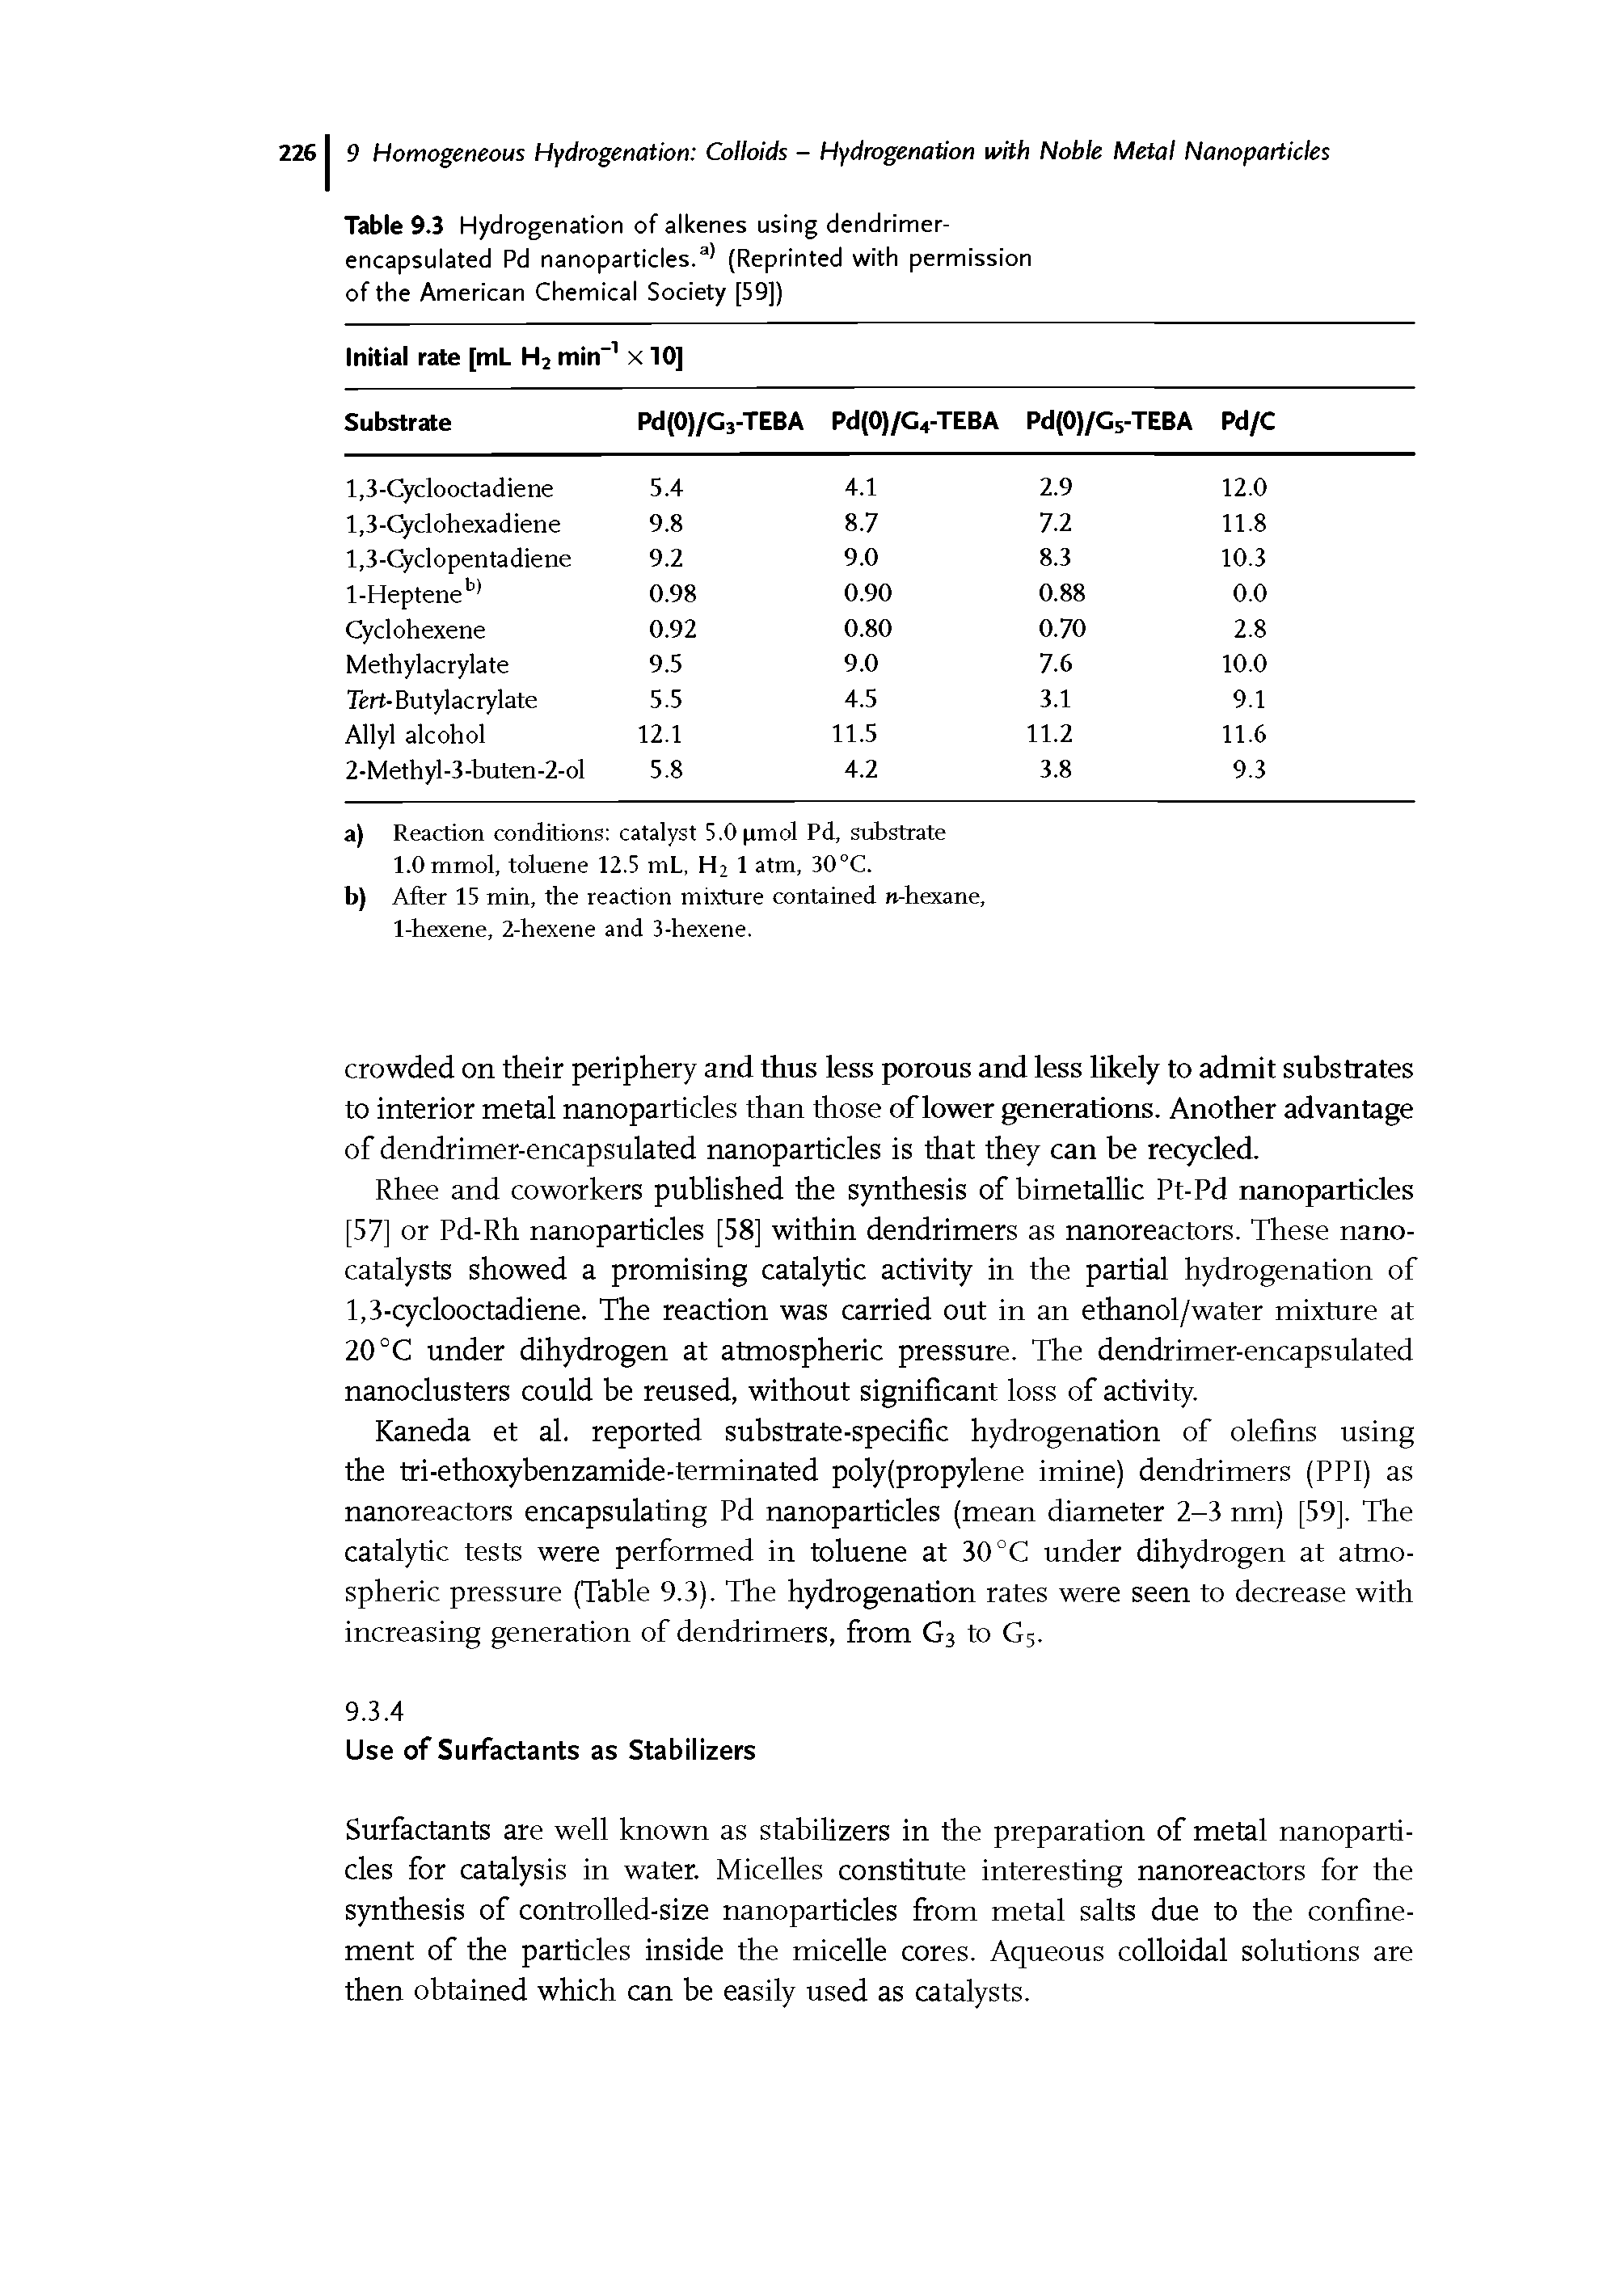 Table 9.3 Hydrogenation of alkenes using dendrimer-encapsulated Pd nanoparticles.a) (Reprinted with permission of the American Chemical Society [59])...